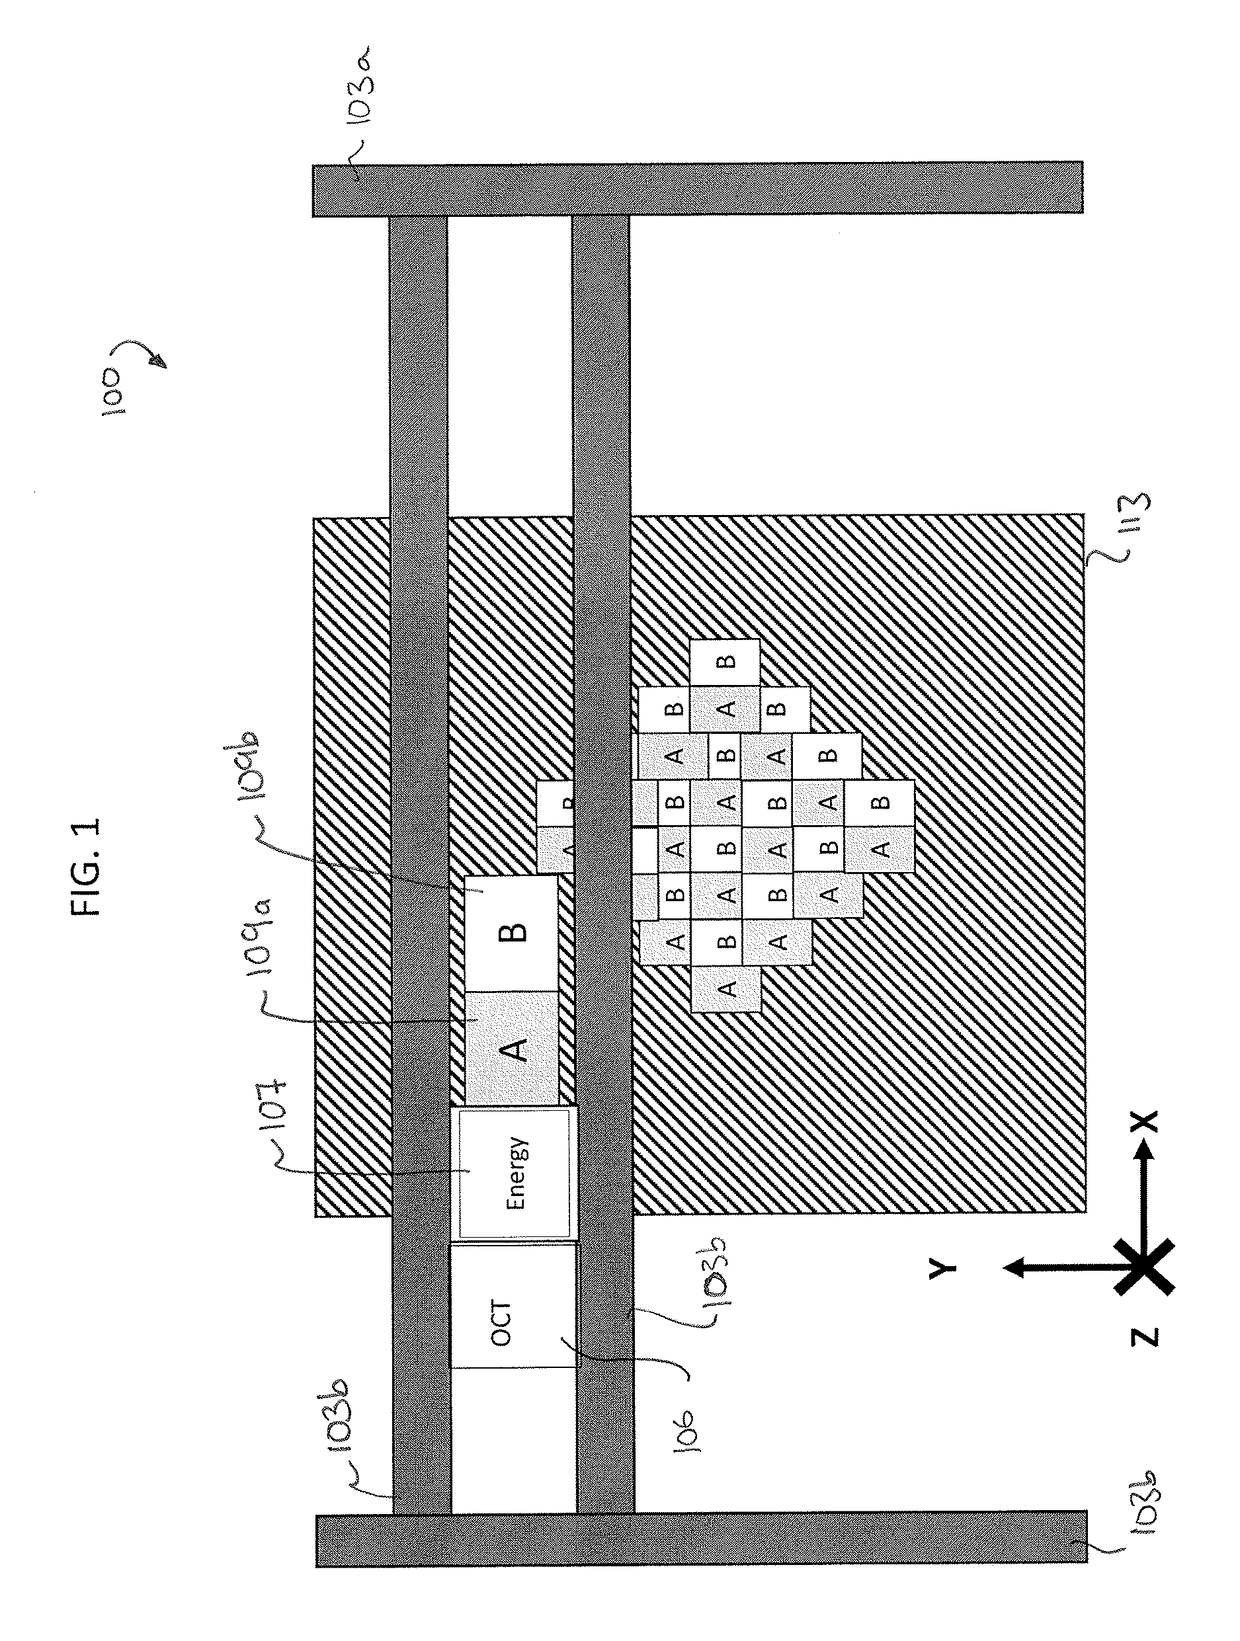 Systems, devices, and methods for inkjet-based three-dimensional printing